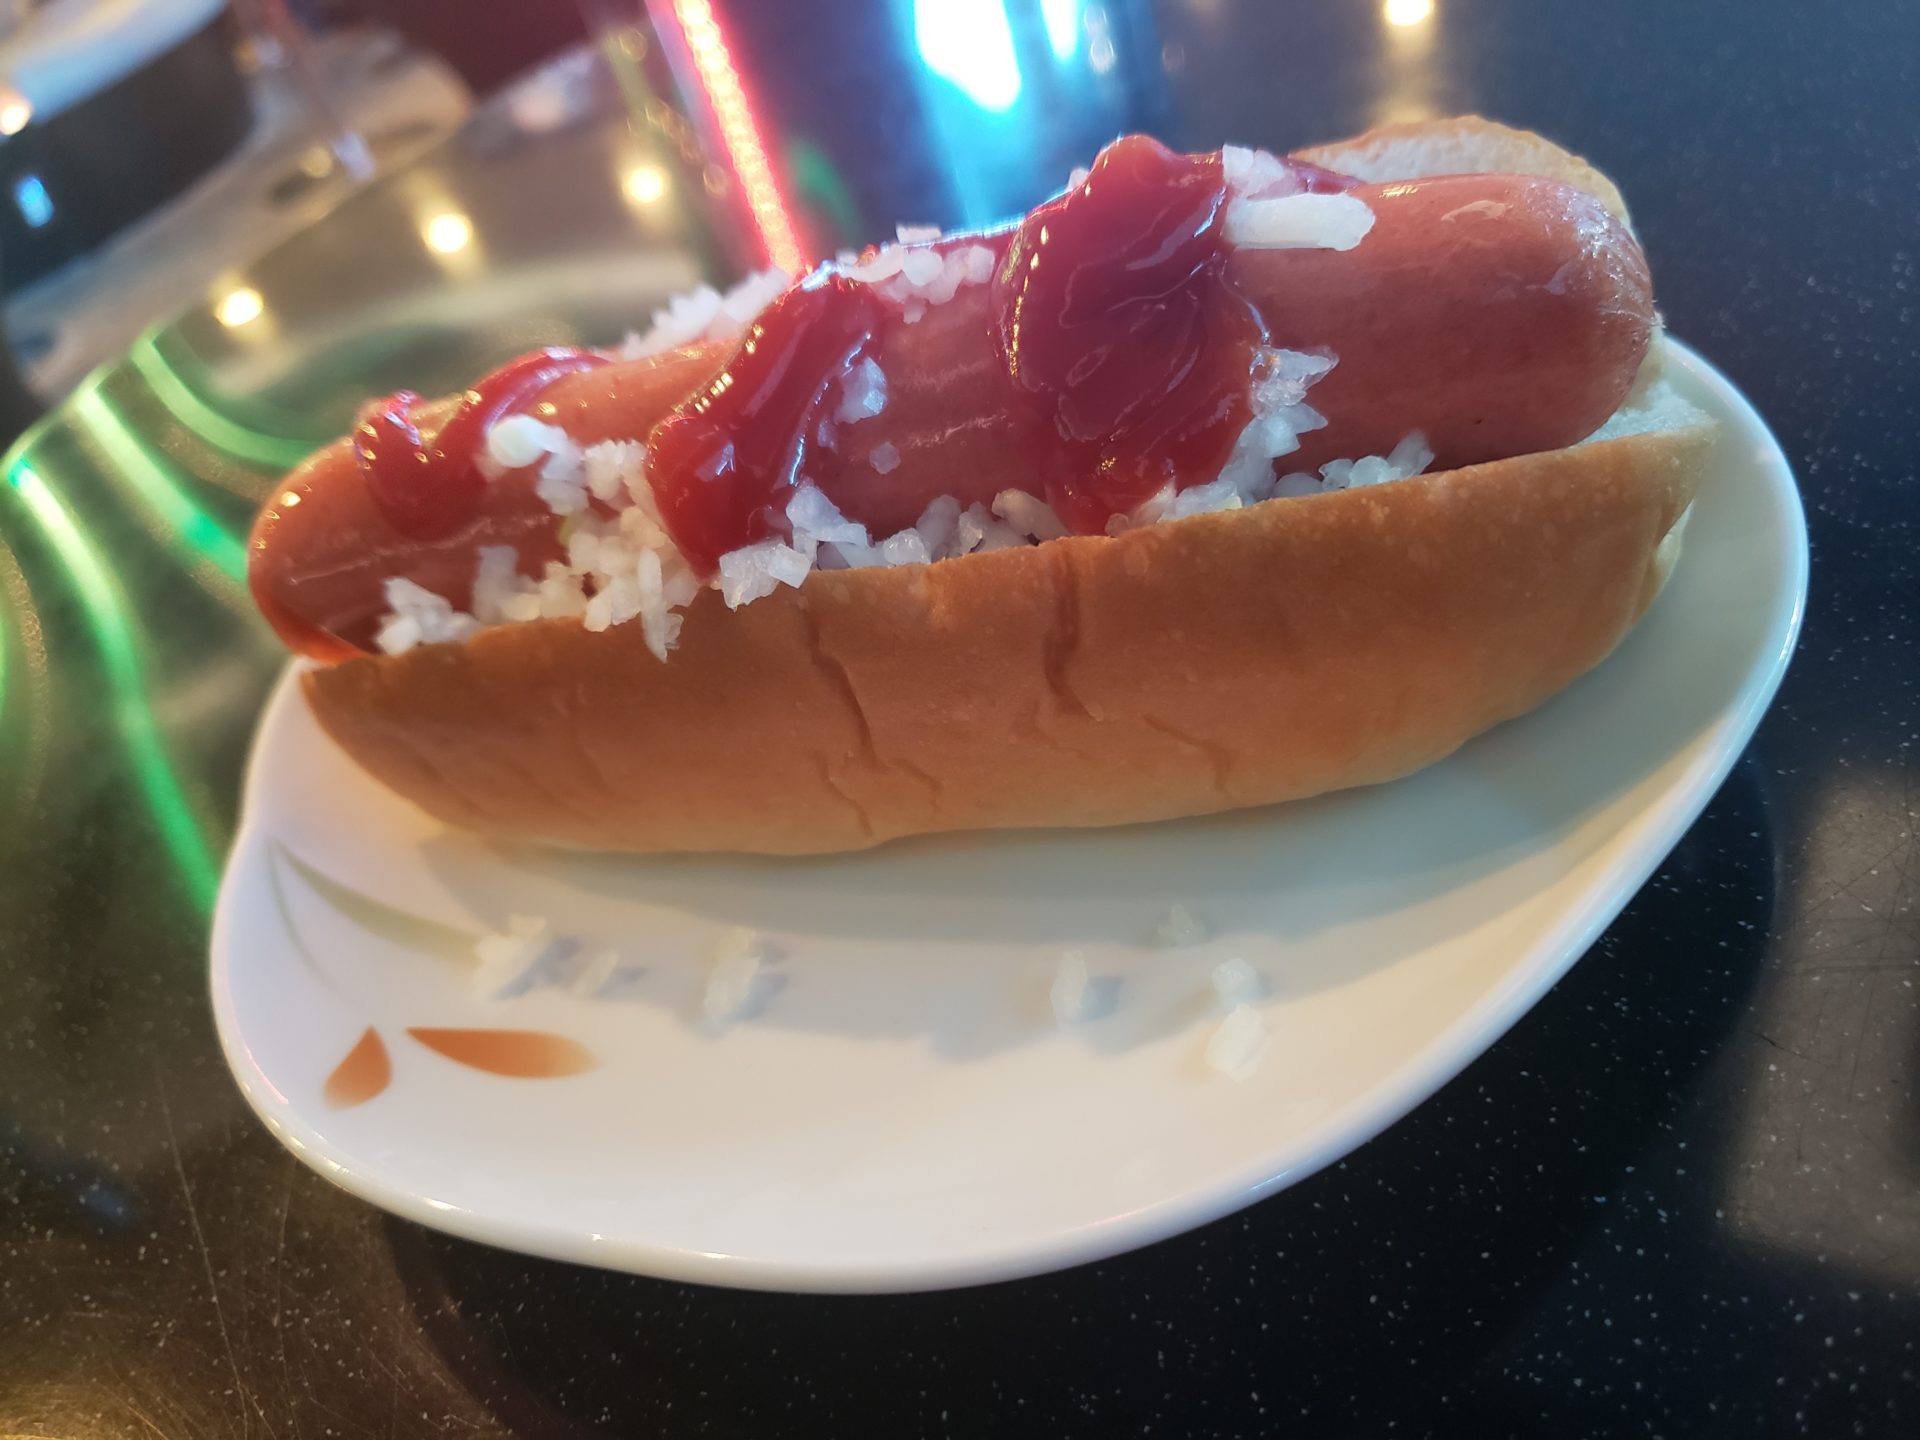 a hot dog with rice and ketchup on a plate